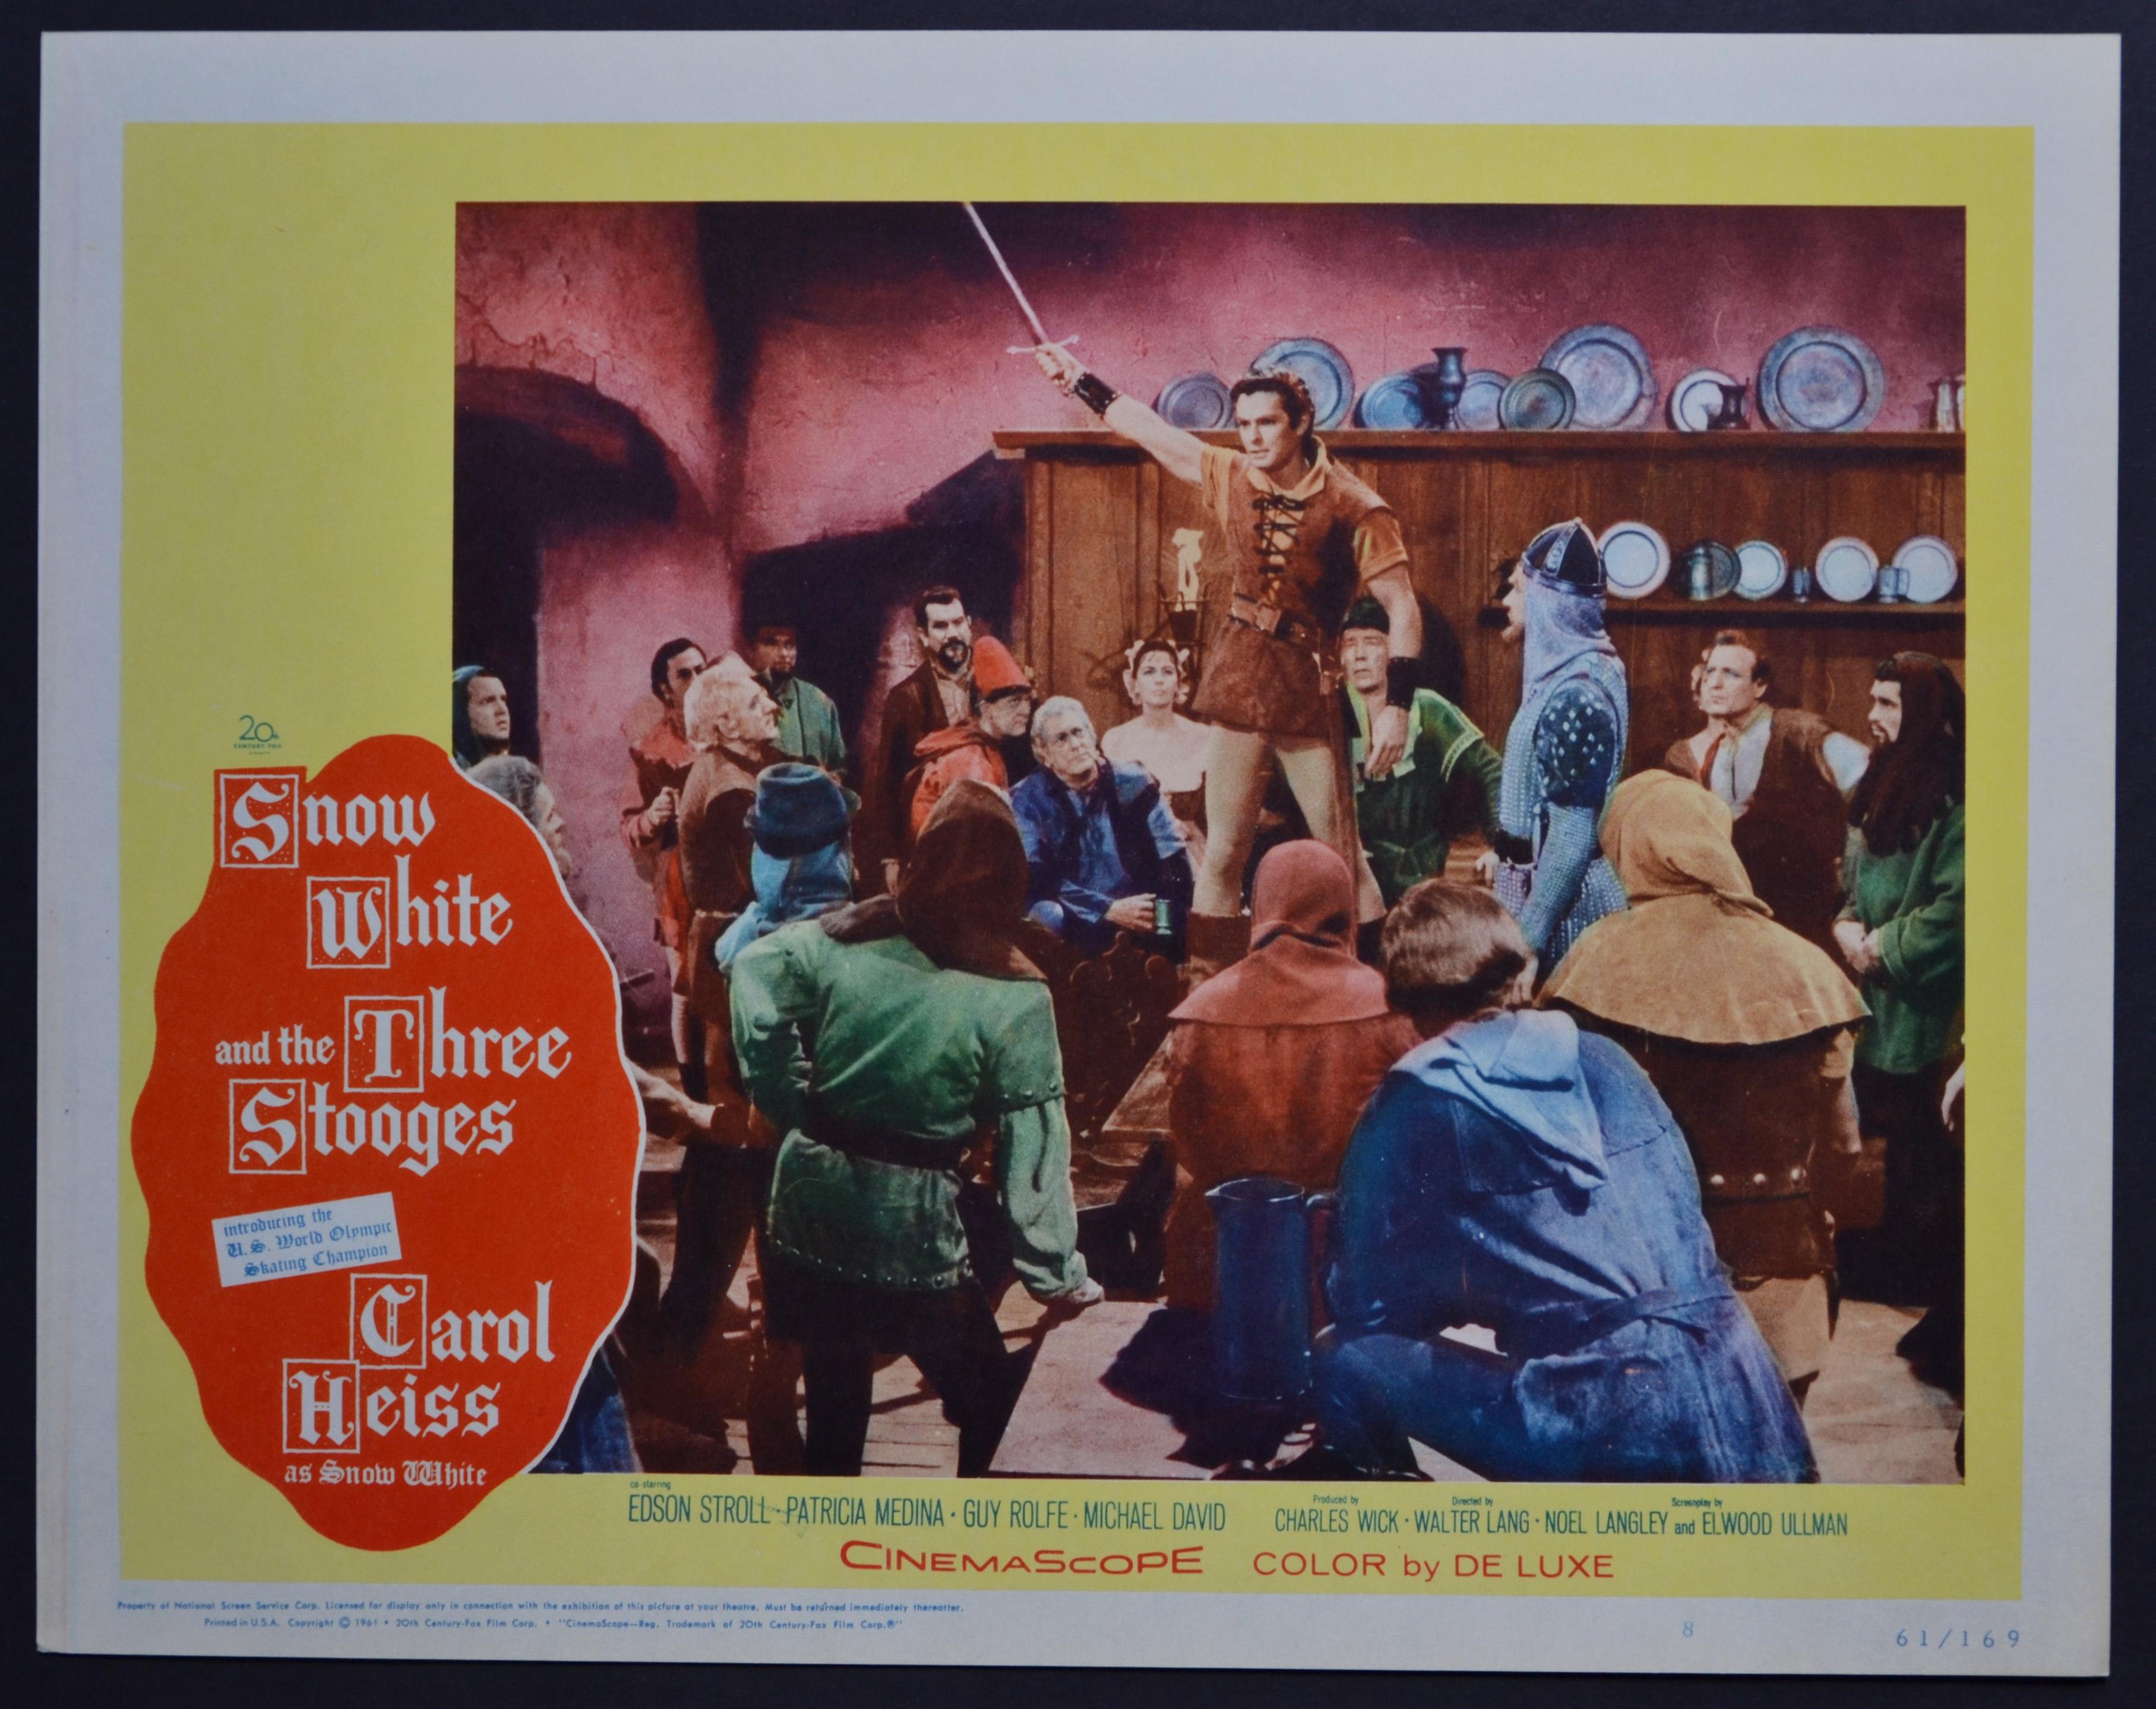 Unknown Interior Print - „Snow White and the Three Stooges“ Original Lobby Card of the Movie, USA 1961.